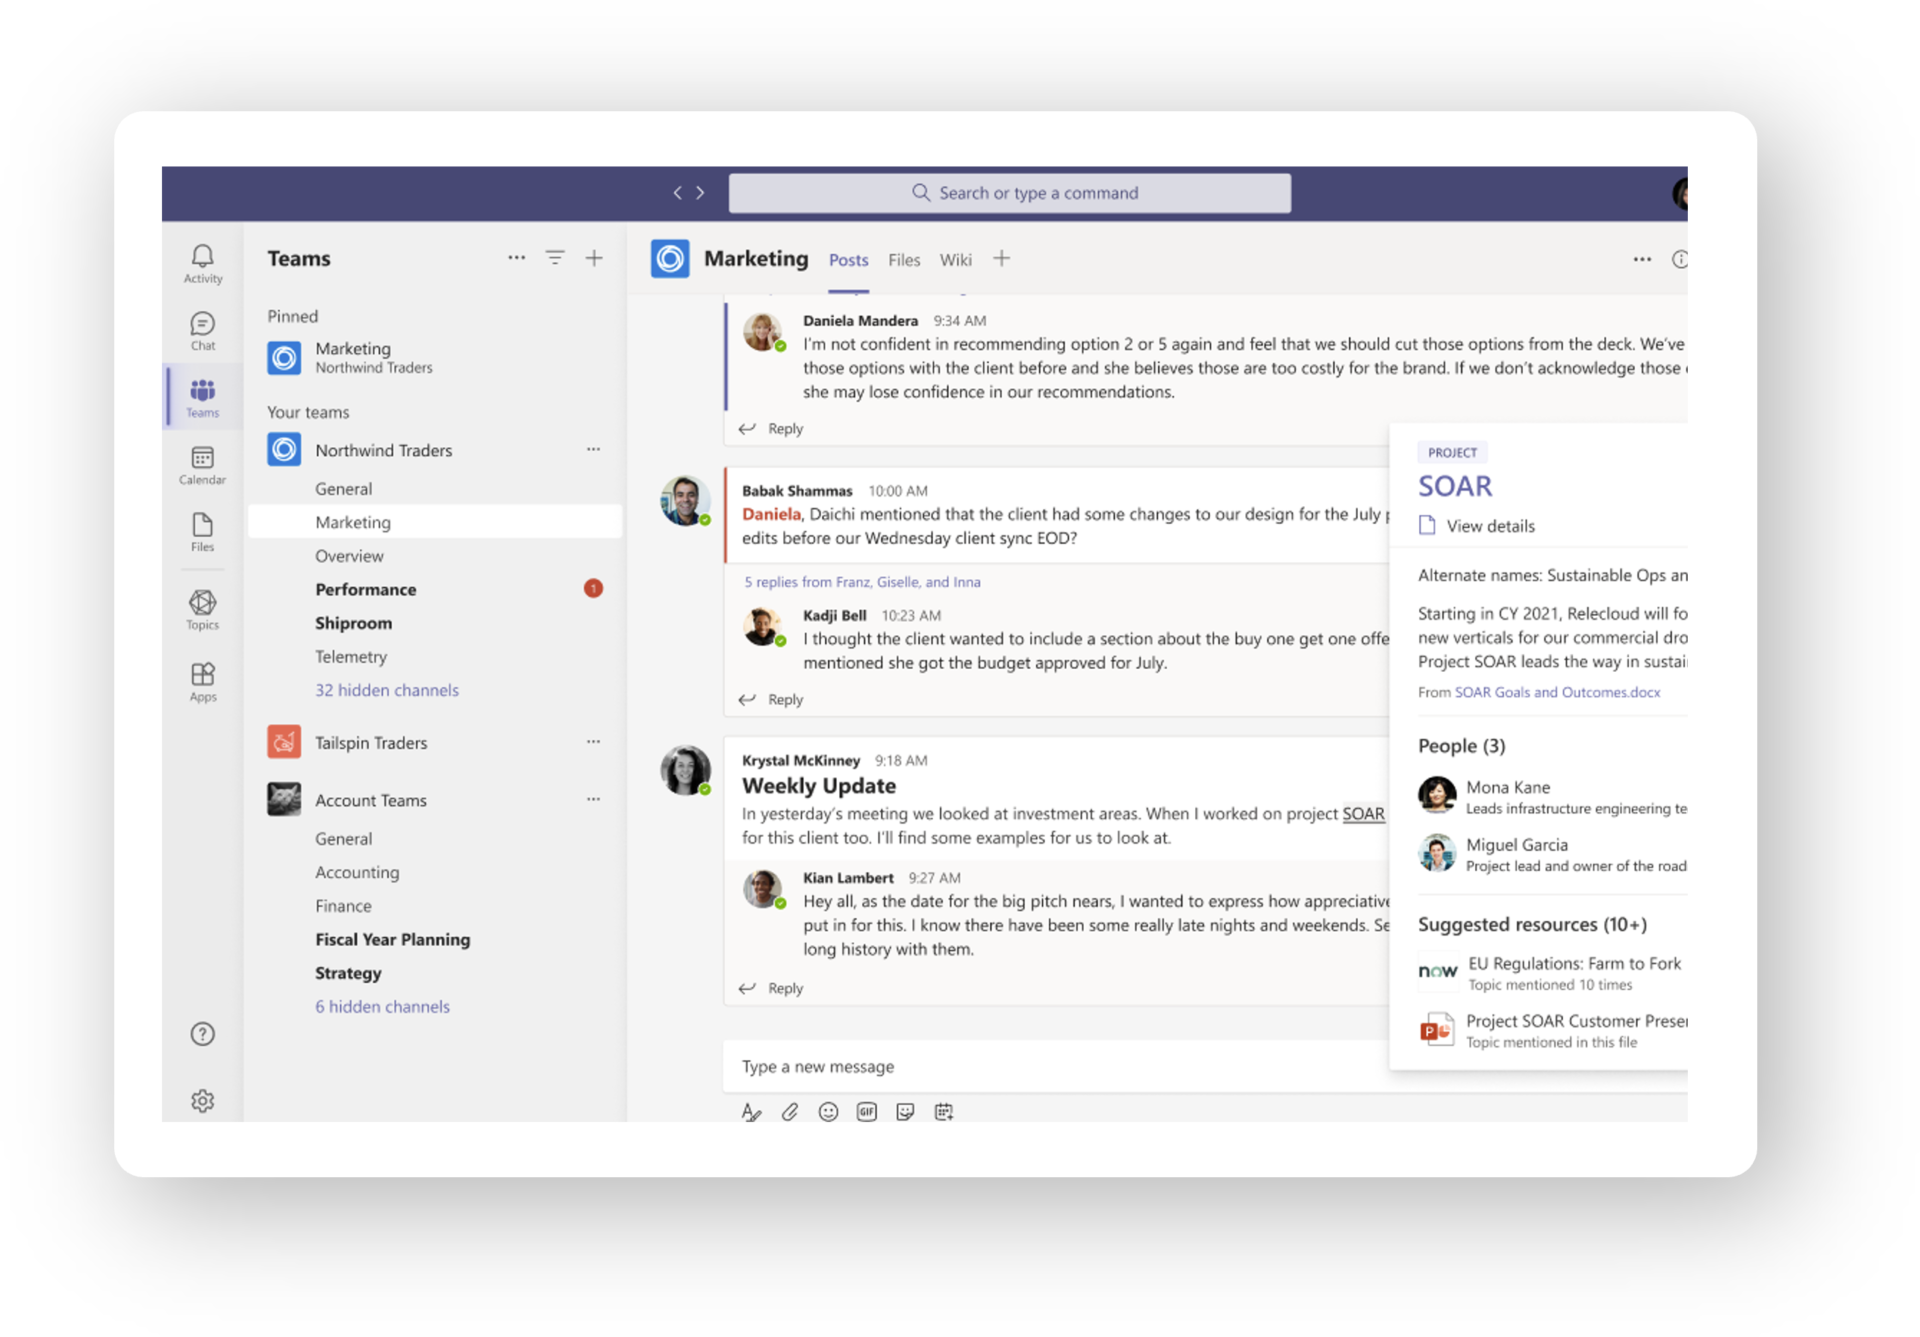 Viva Topics in Microsoft Teams with a white tablet border